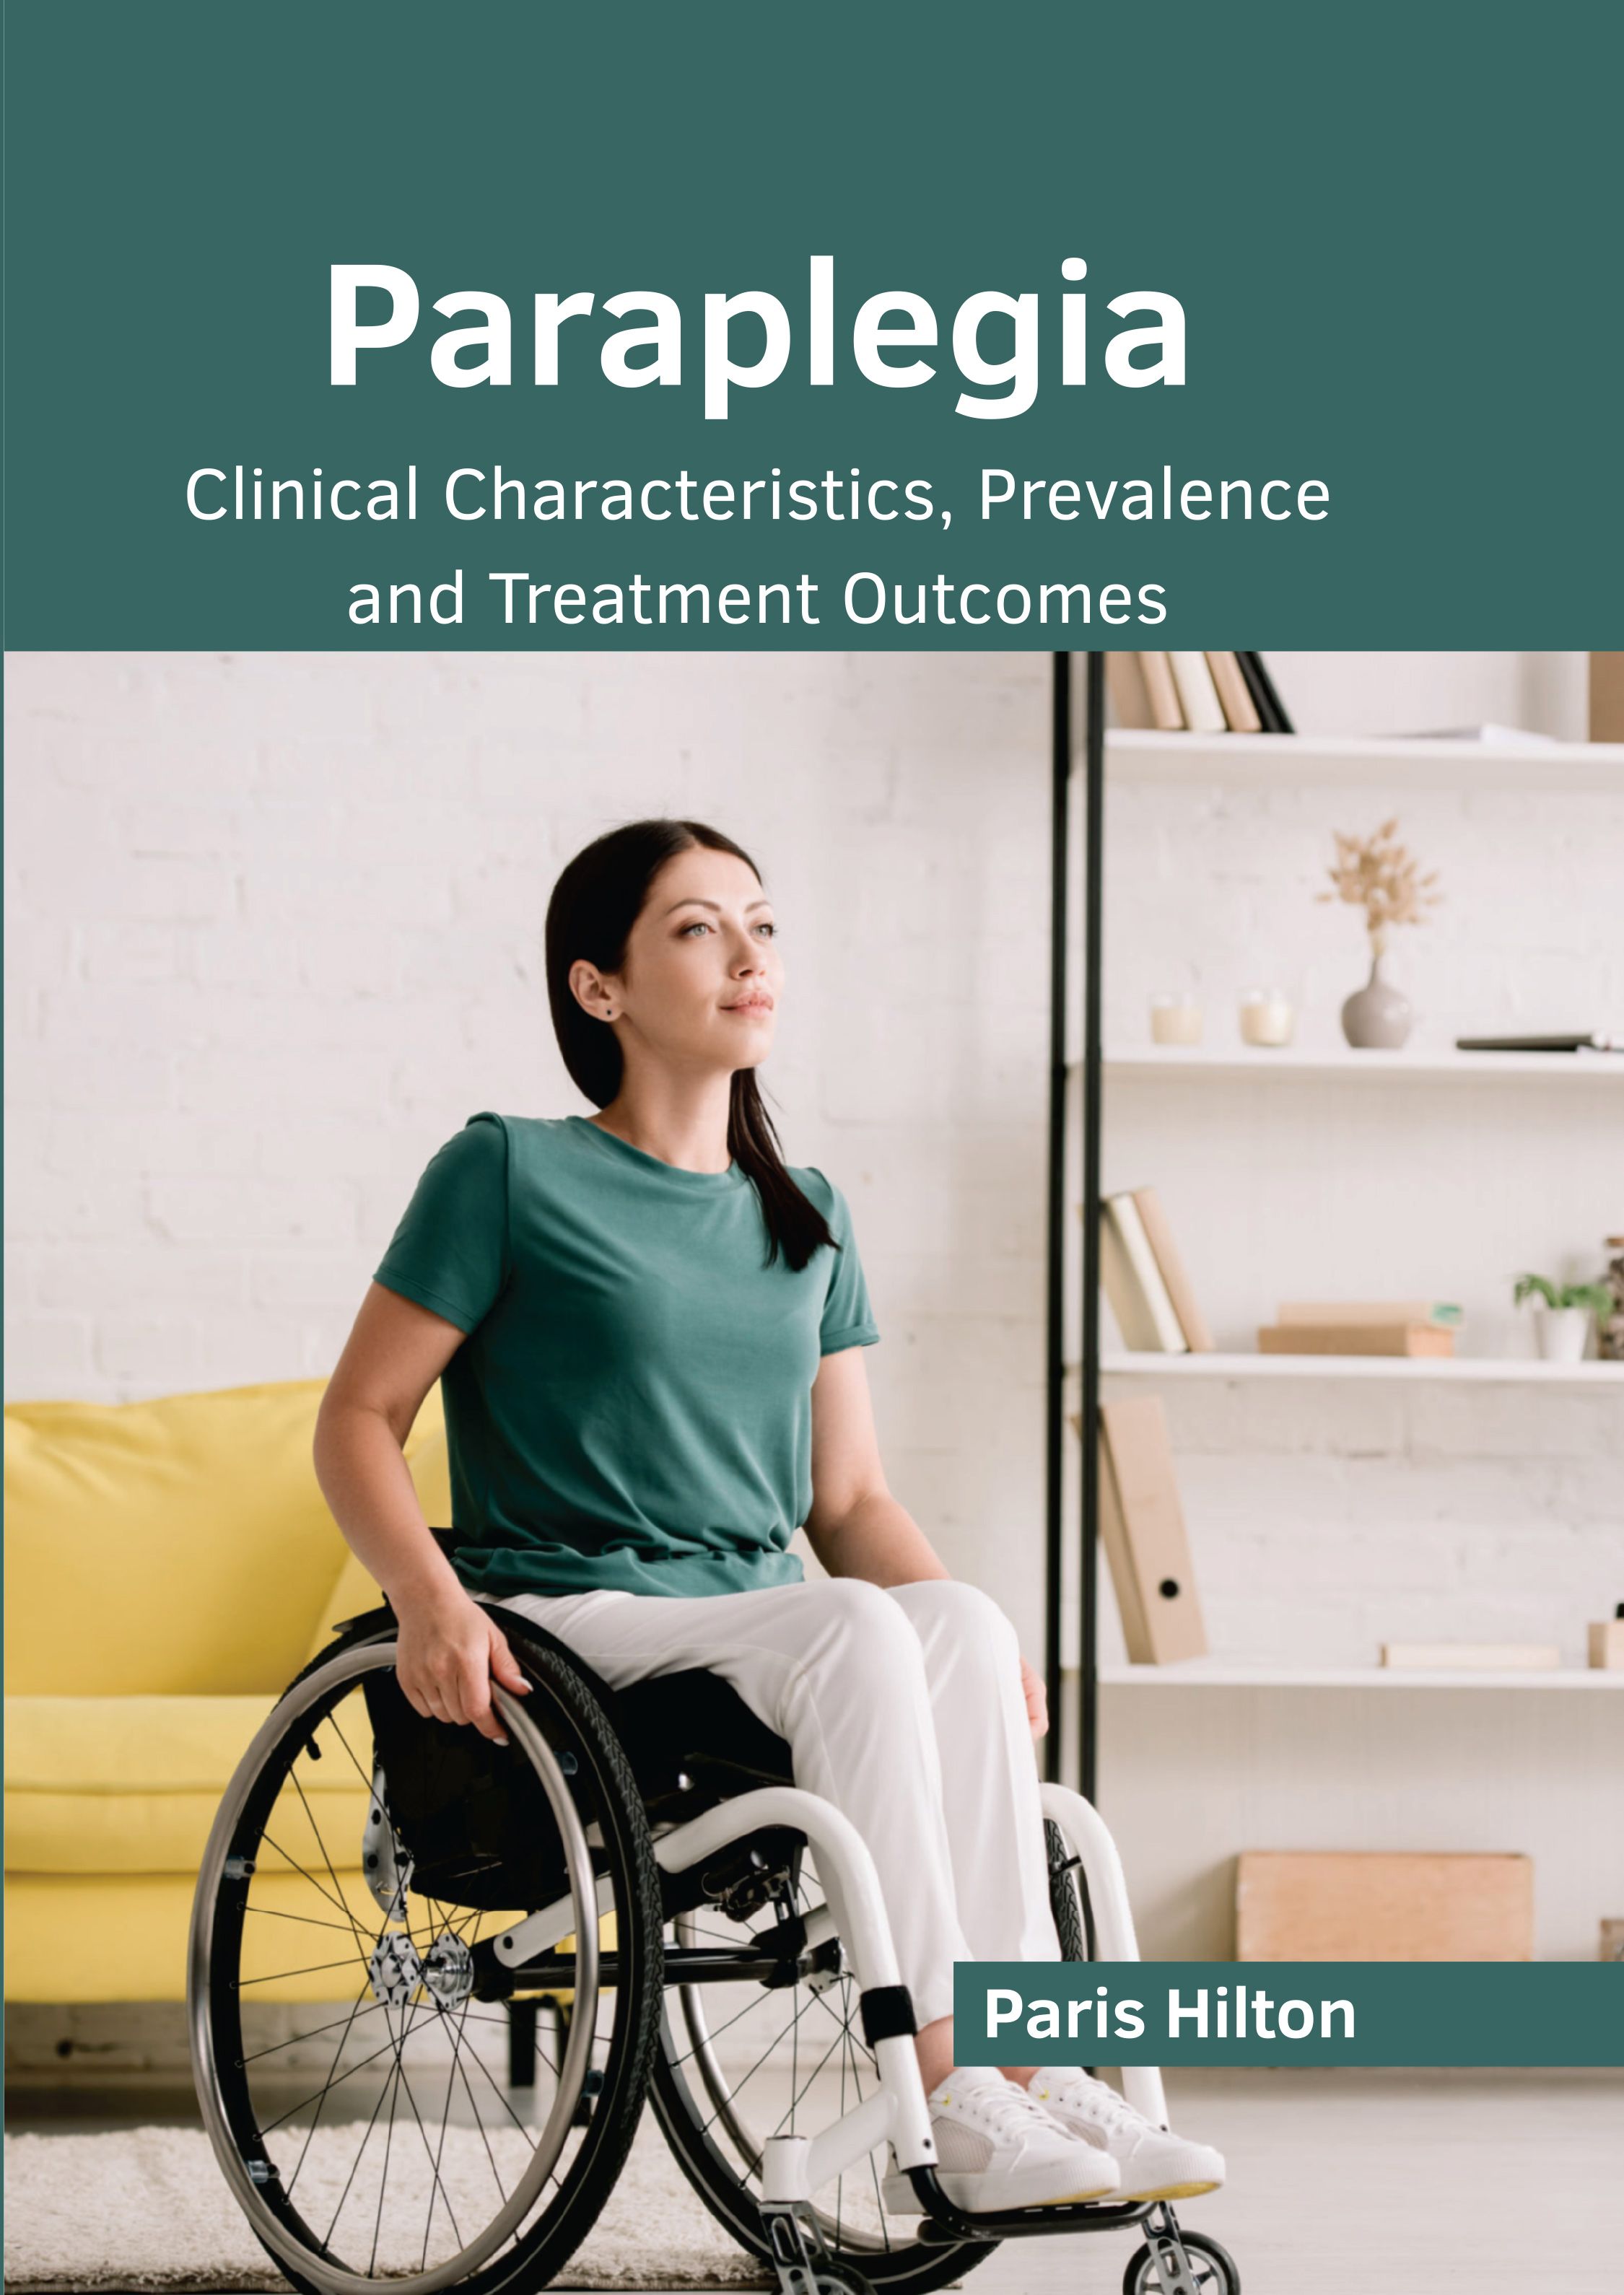 PARAPLEGIA: CLINICAL CHARACTERISTICS, PREVALENCE AND TREATMENT OUTCOMES